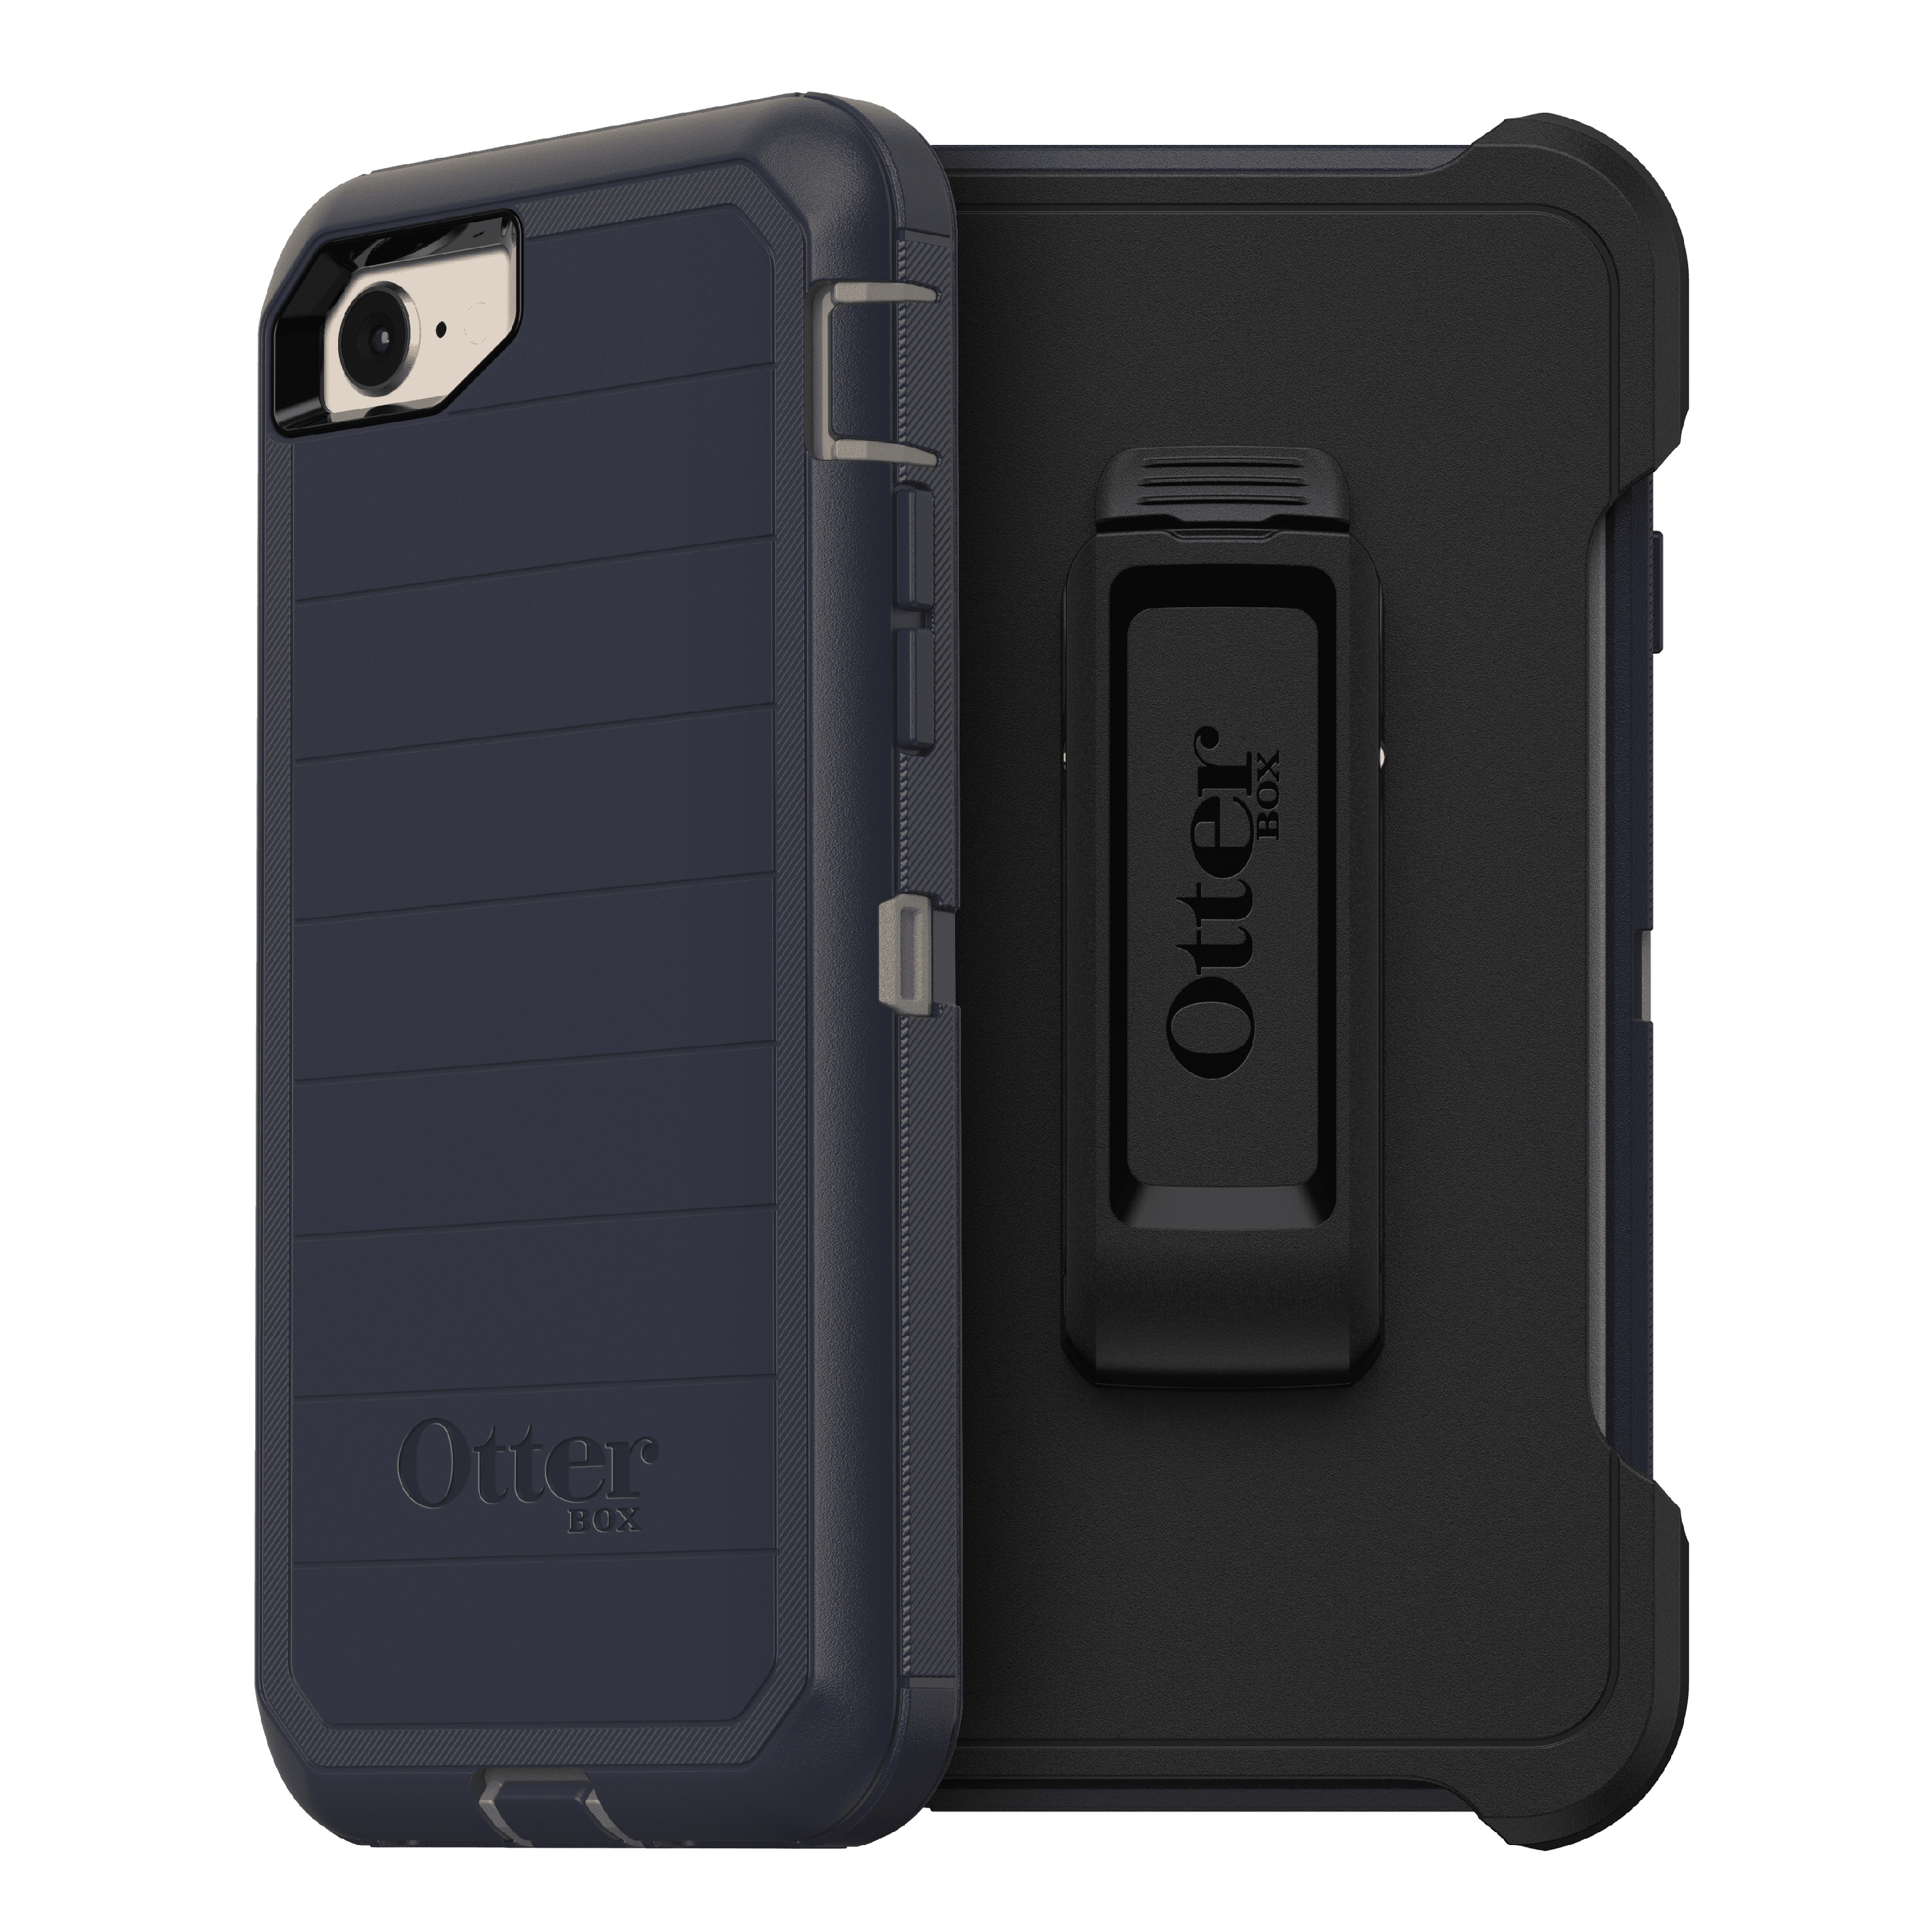 OtterBox Defender Pro Series Case for iPhone 8/iPhone 7, Black